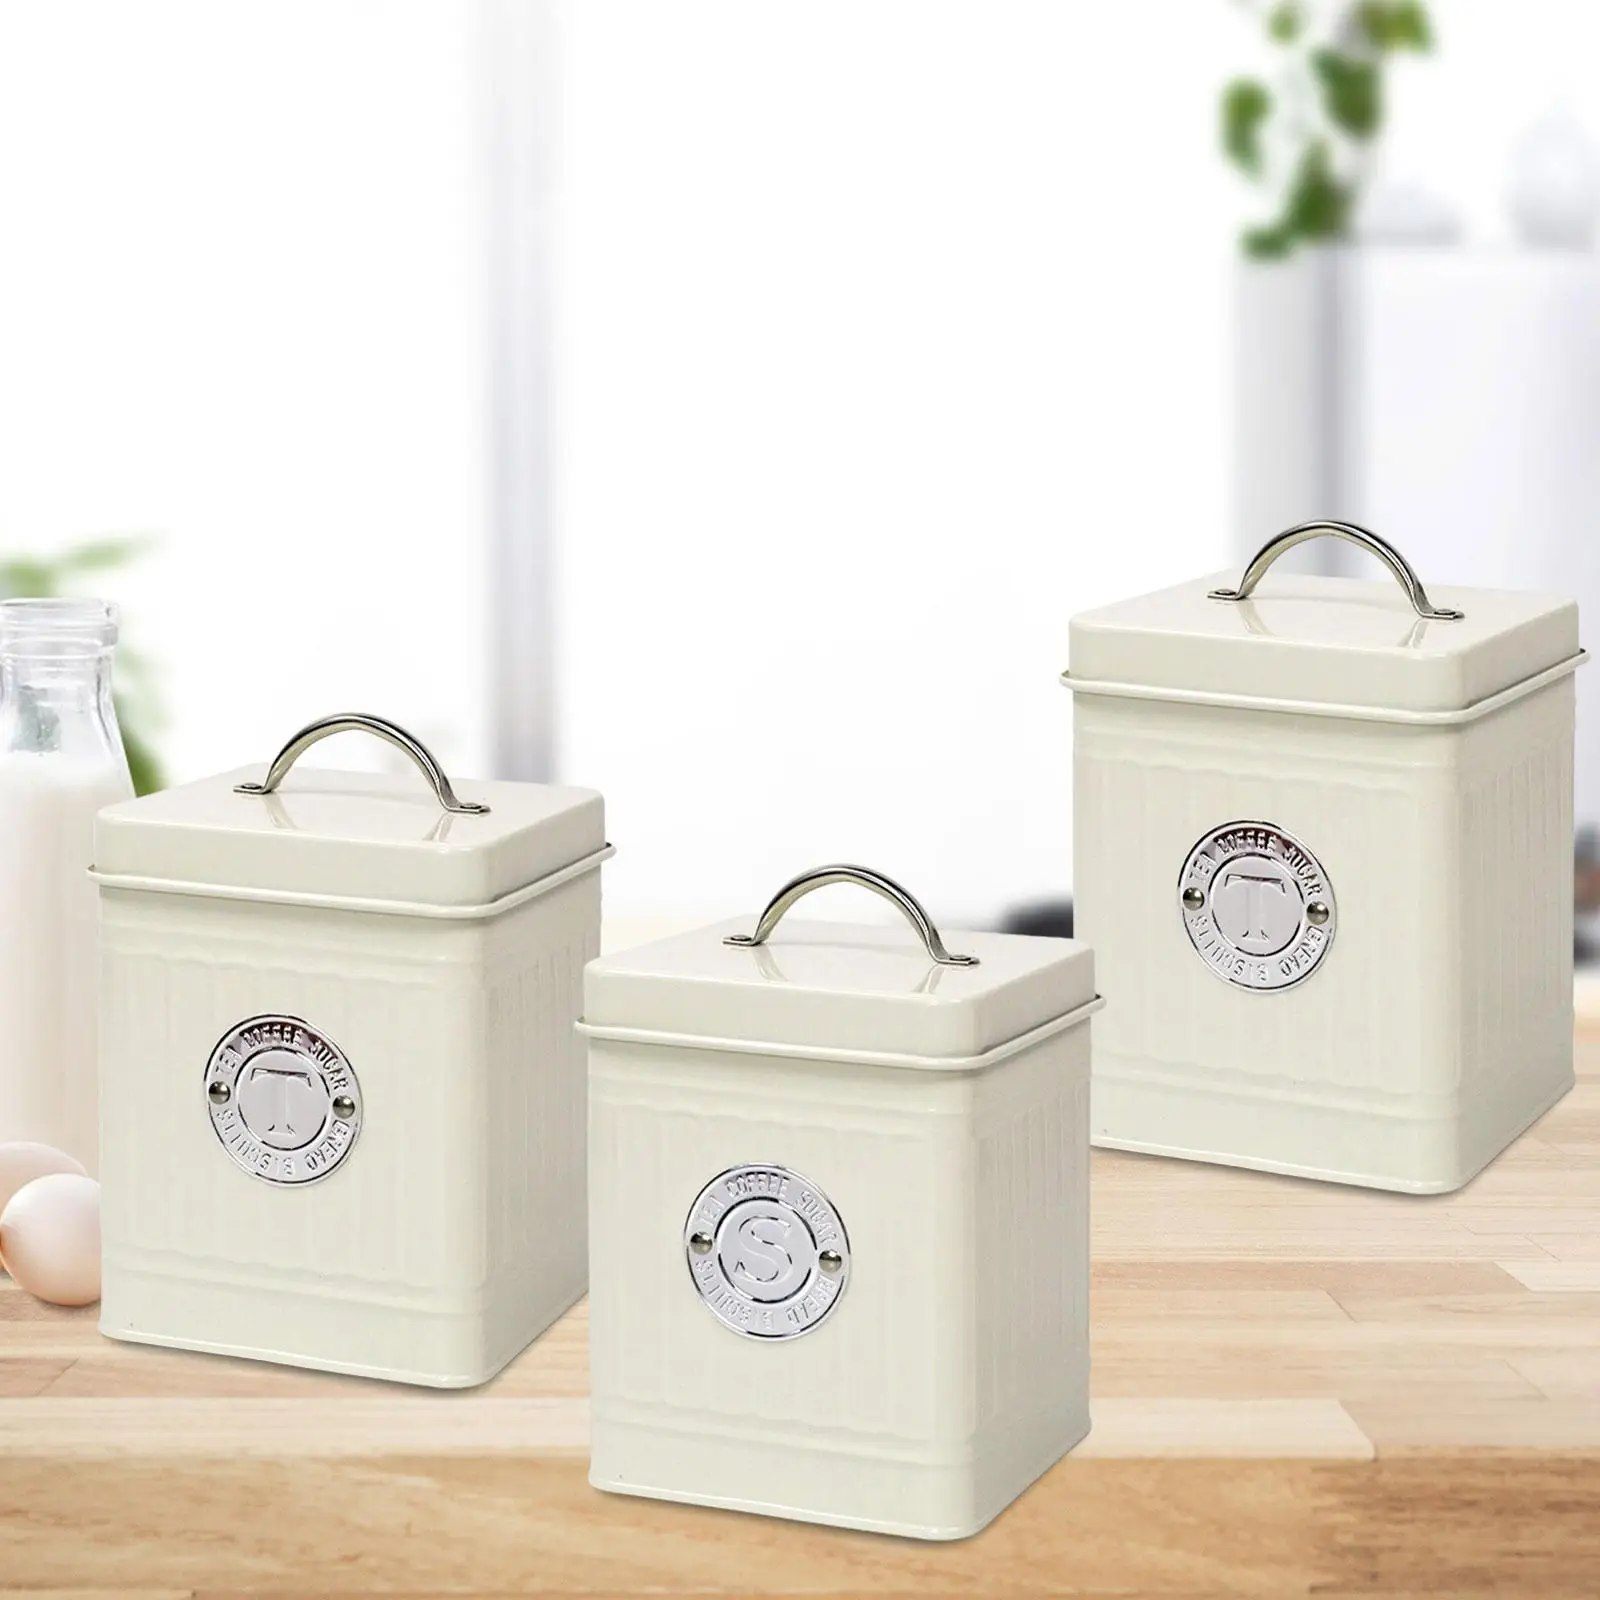 3x Decorative Kitchen Canisters with Lids 4.53x4.53x5.51inch 1.5L Square Case Tea Sugar Coffee Container for Kitchen Cafe Office